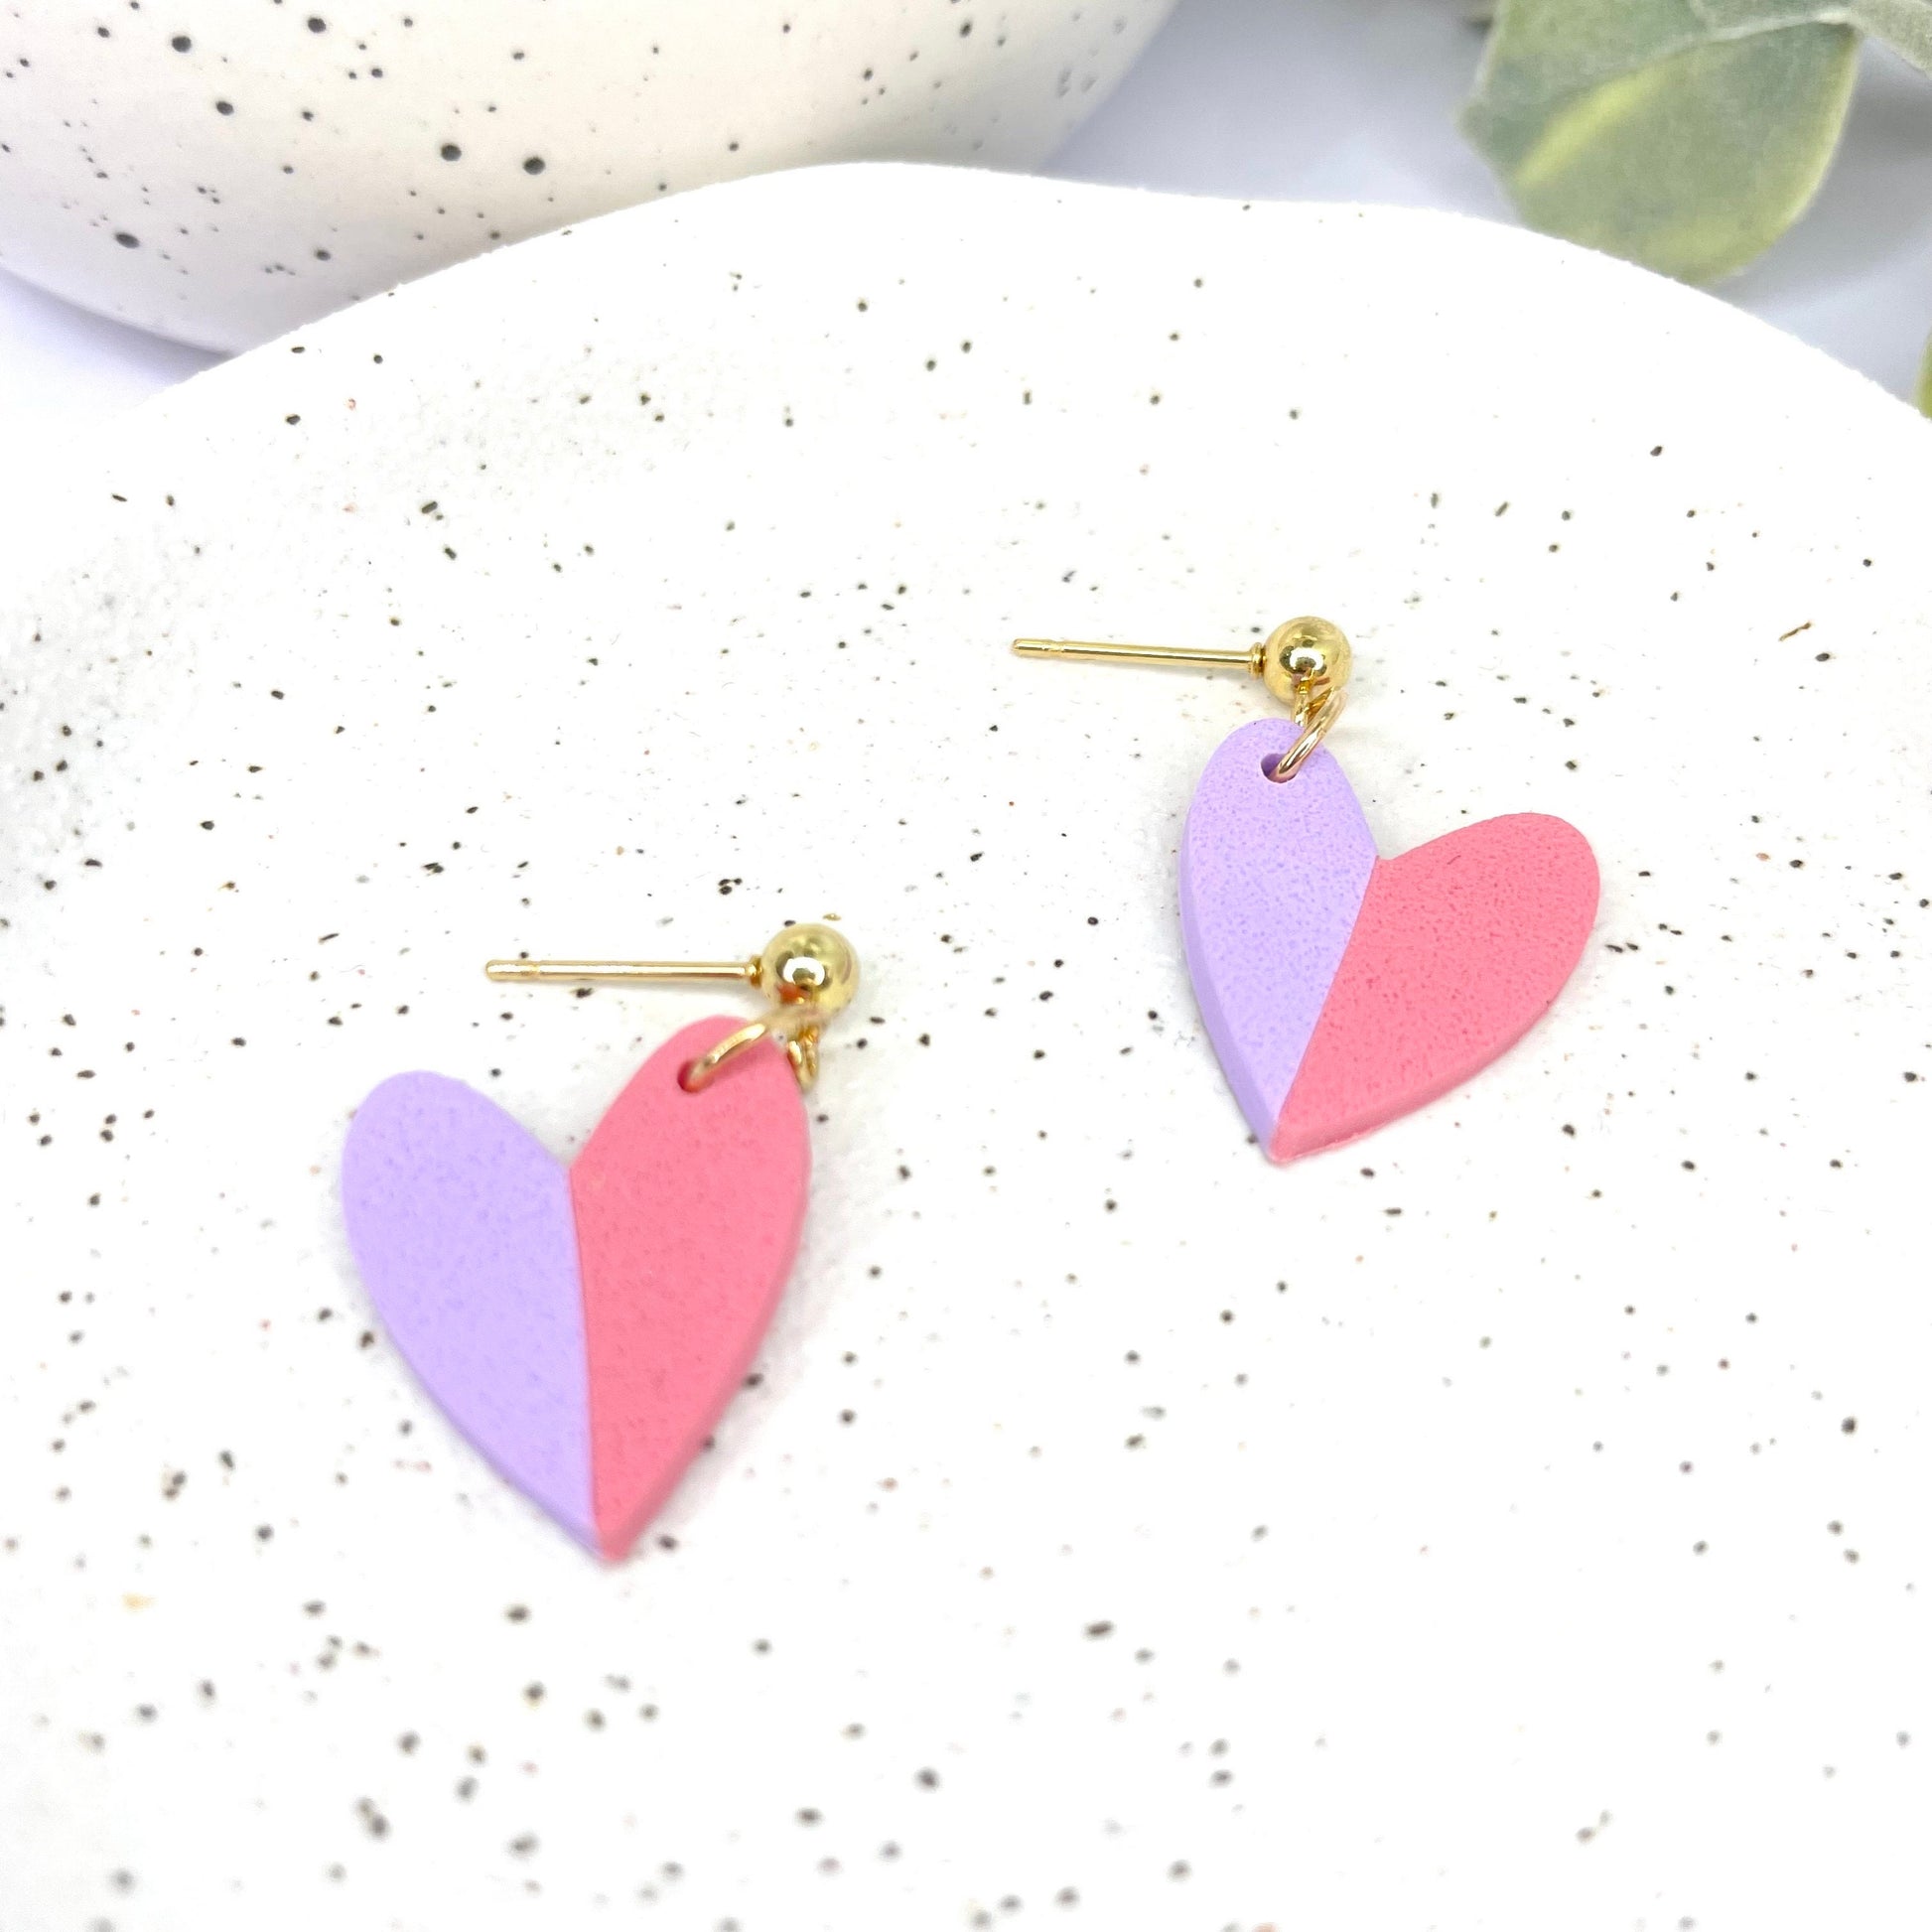 Heart dangle earrings, pink and lilac two tone earrings, Galentine’s gift for her, girlfriend gift, wife gift, Valentine’s jewellery,